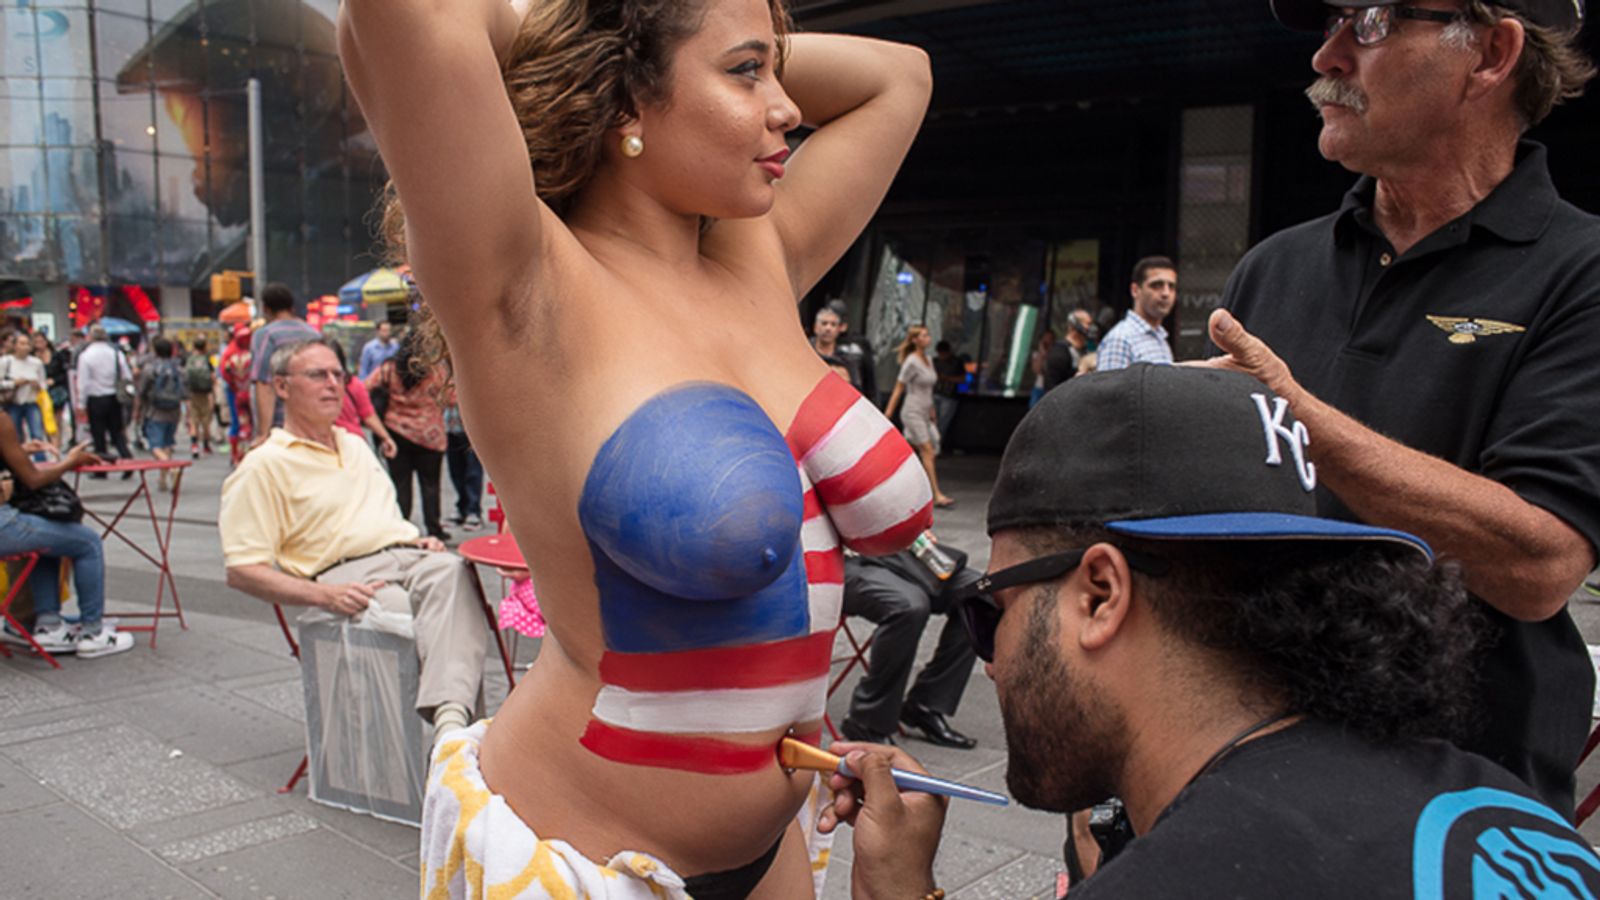 NY Post Gets Pissy About Desnudas in Times Square